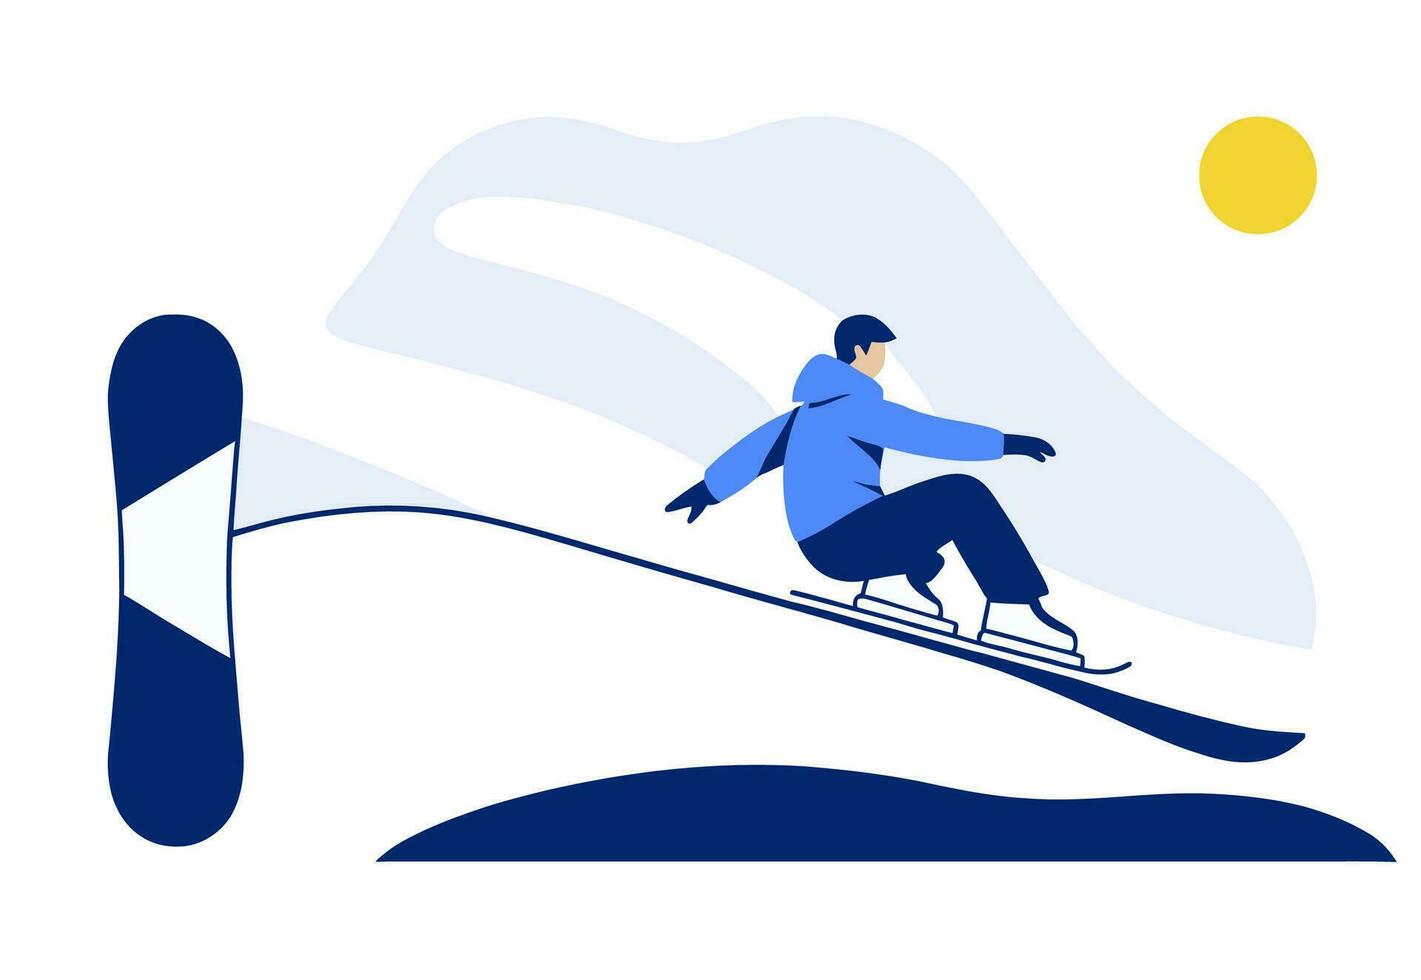 A man rides down the mountain on a snowboard. Vector illustration on the theme of snowboarding and other winter sports.